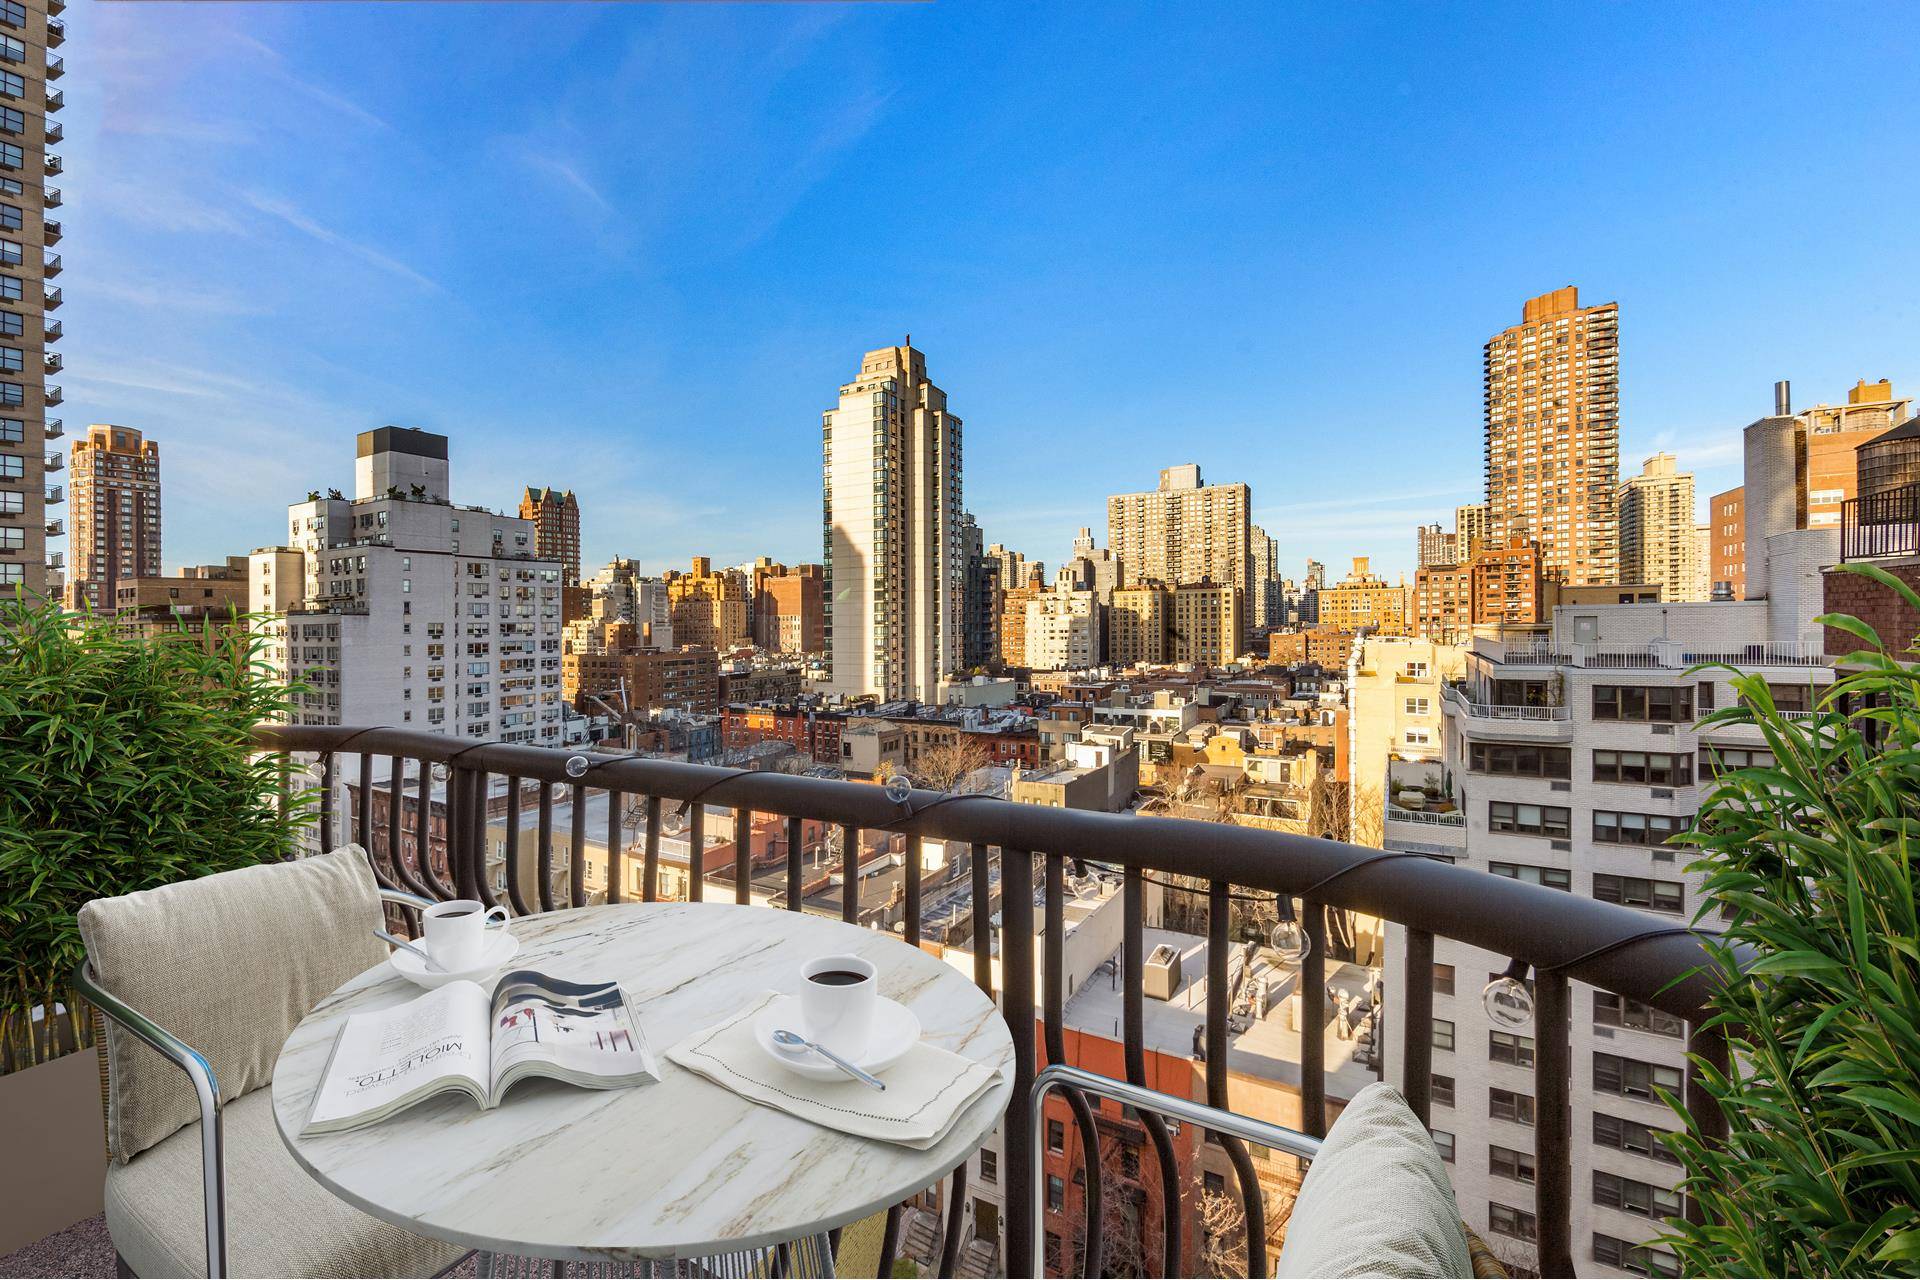 Bright and beautifully renovated, this corner apartment offers three bedrooms, two bathrooms, a washer dryer, and a private balcony with open city views.